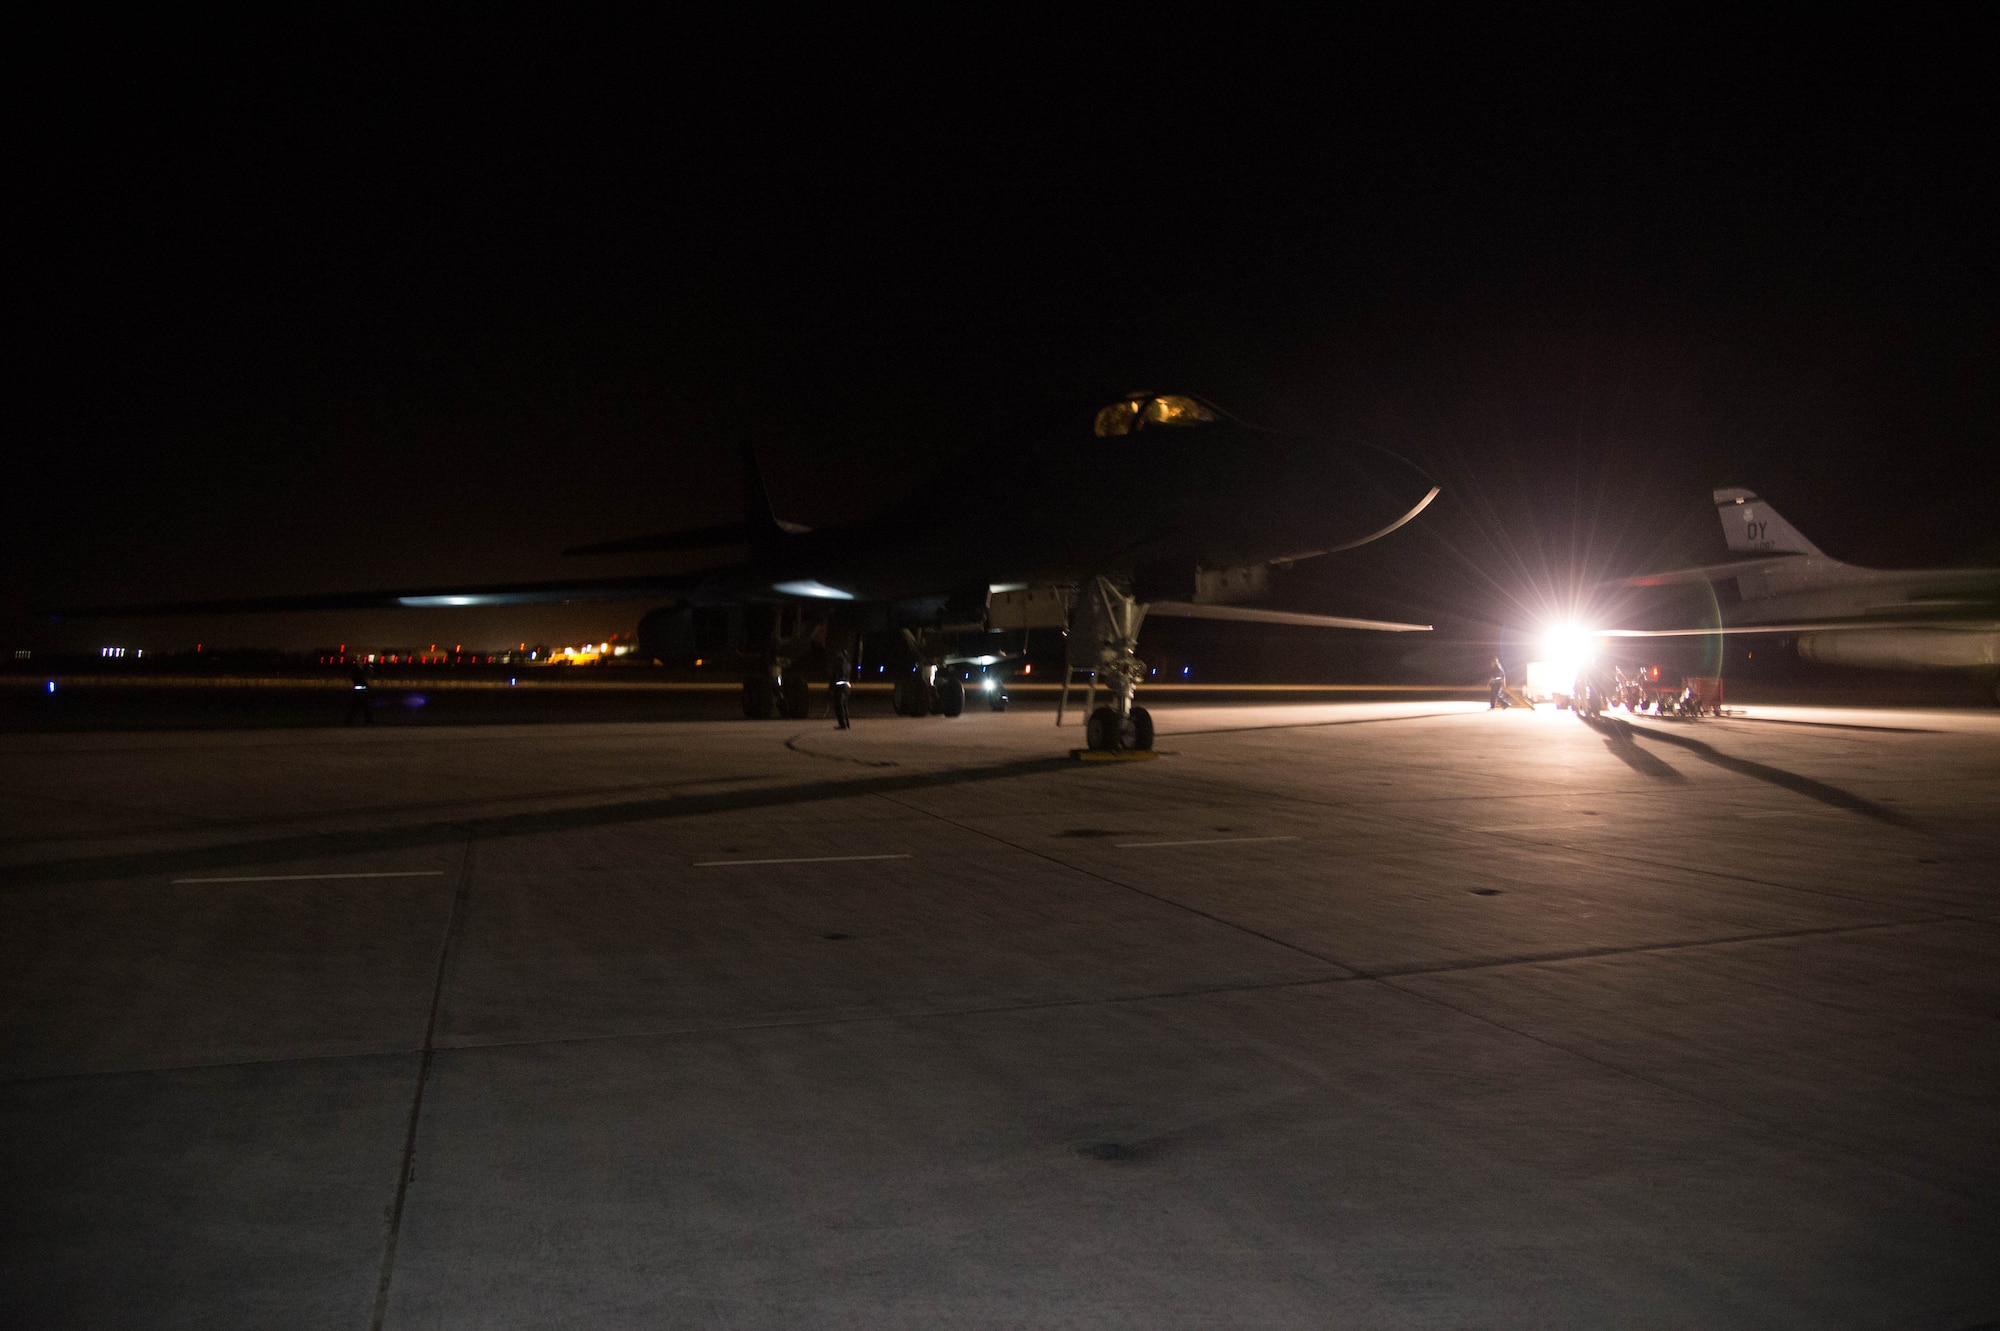 A B-1 Lancer sits on the flightline at the Boca Chica Naval Air Station, Key West Fla., March 23, 2017. Airmen from the 489th Bombardment Group and the 7th Bomb Wing are part of Total Force Integration; working together to complete the bomber mission. (U.S. Air Force photo by Staff Sgt. Jason McCasland/released)